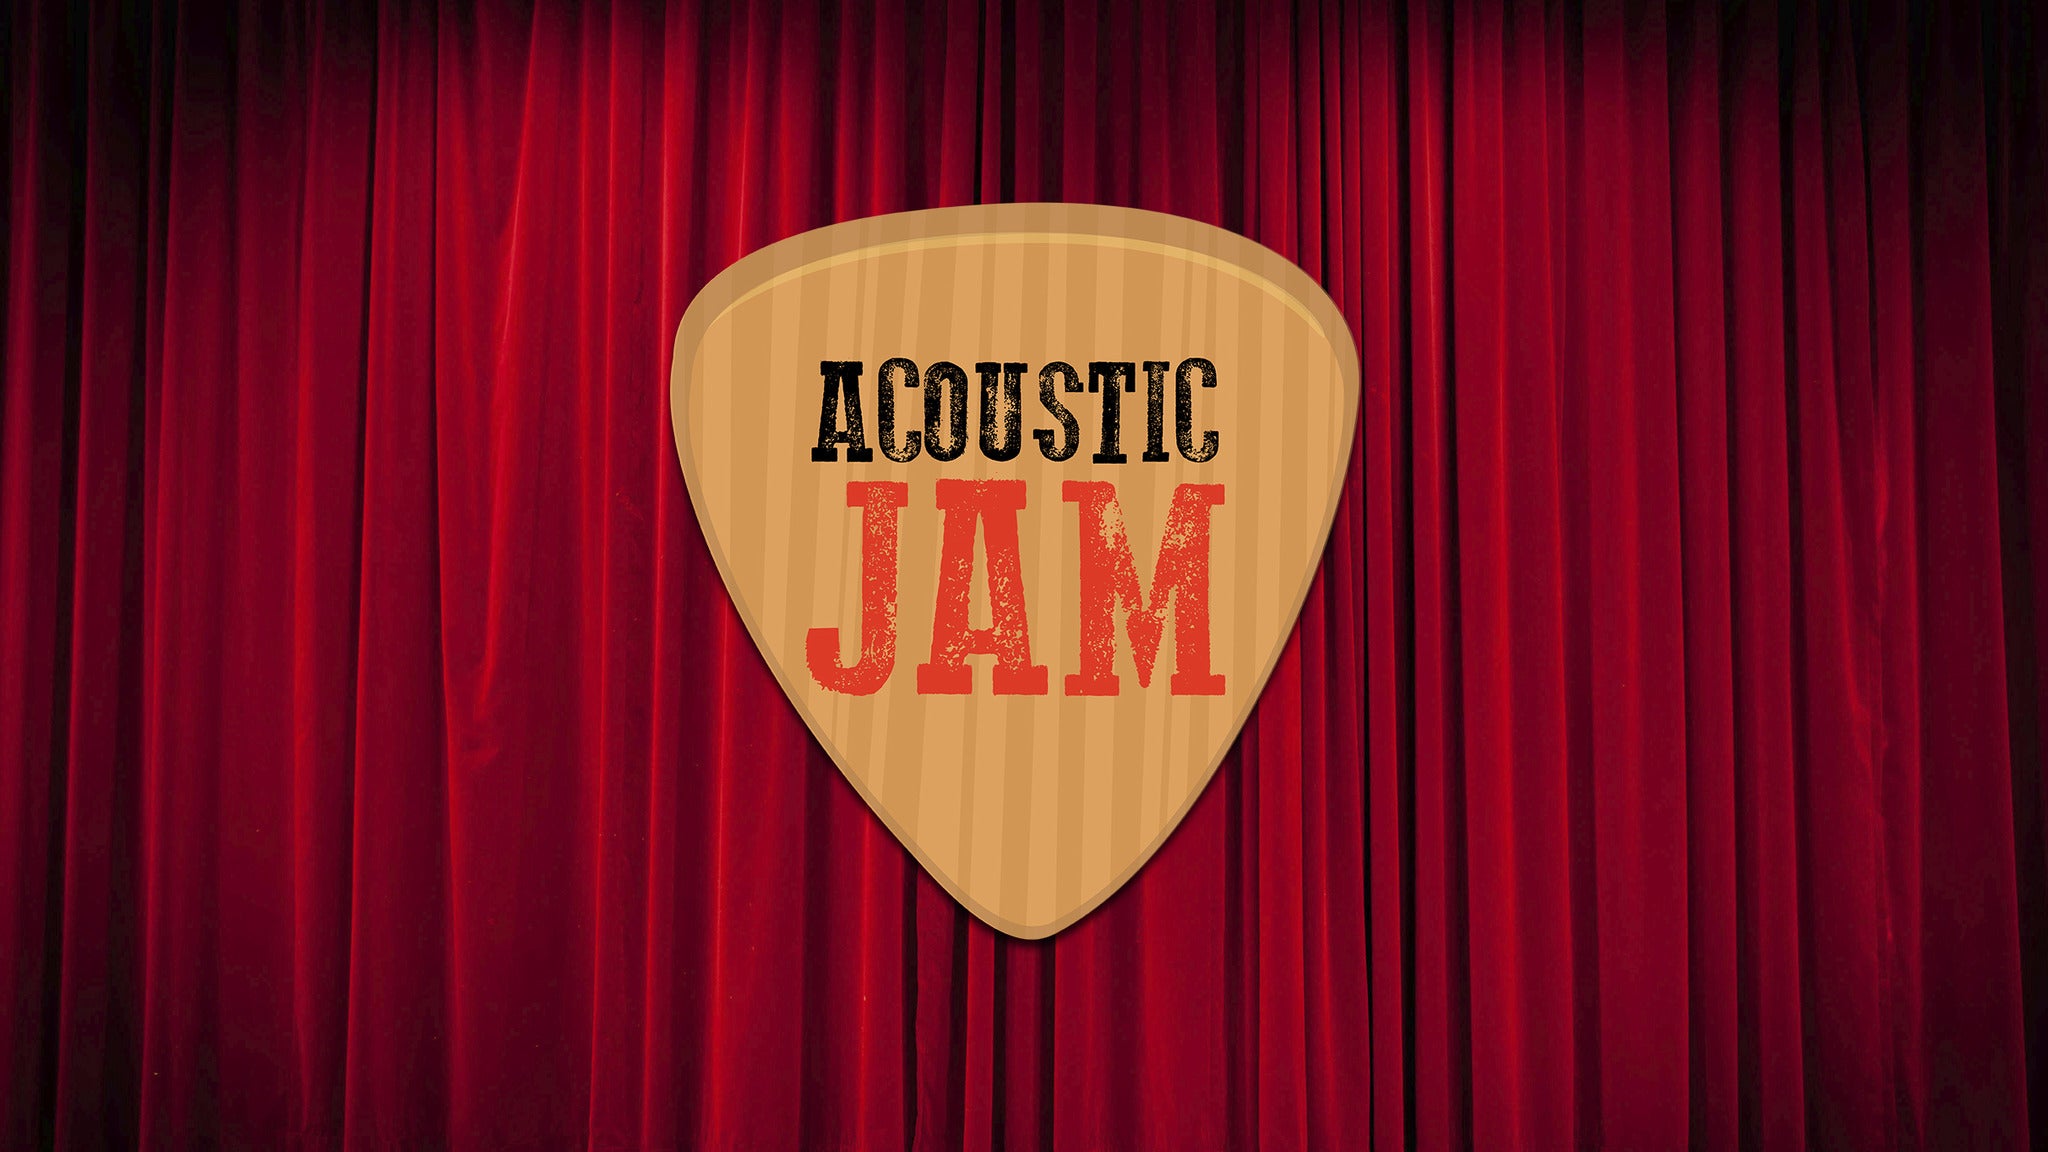 Acoustic Jam 2022 presented by 97.5 WAMZ and KCC Heating and Cooling in Louisville promo photo for HOB Foundation Room Member presale offer code